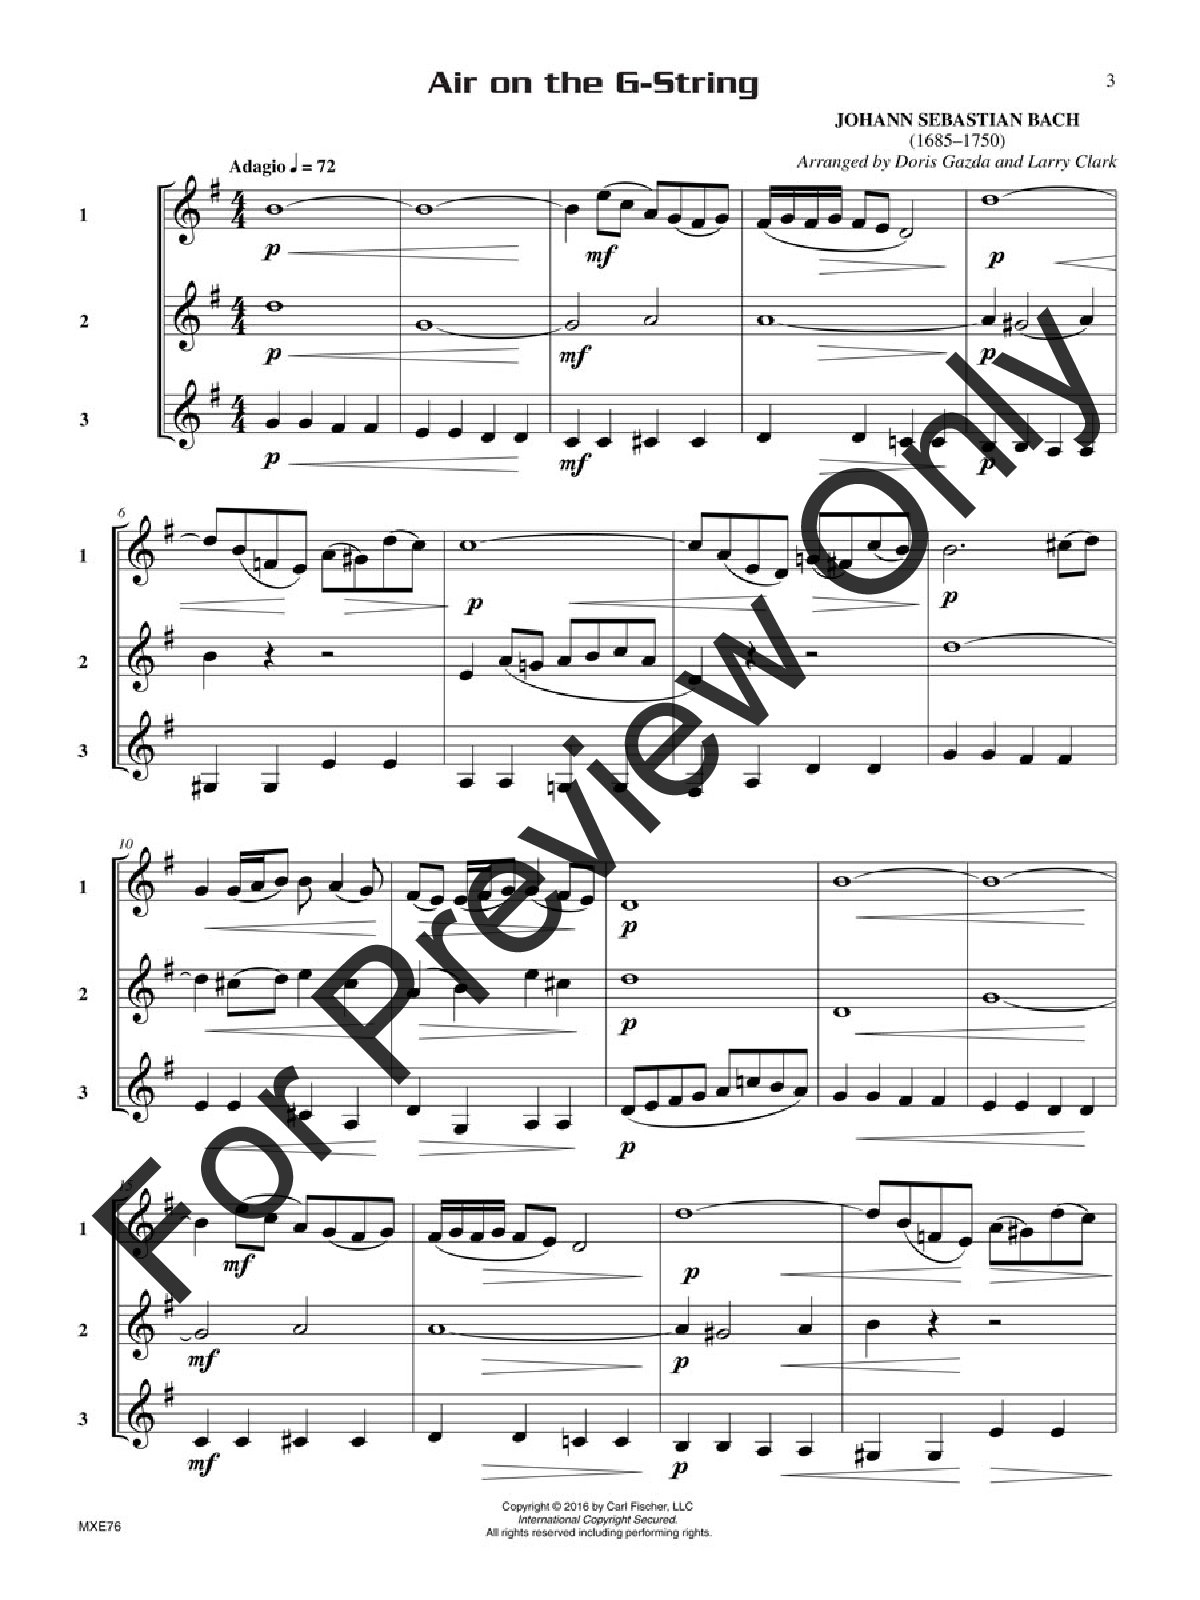 Compatible Trios for Weddings French Horn